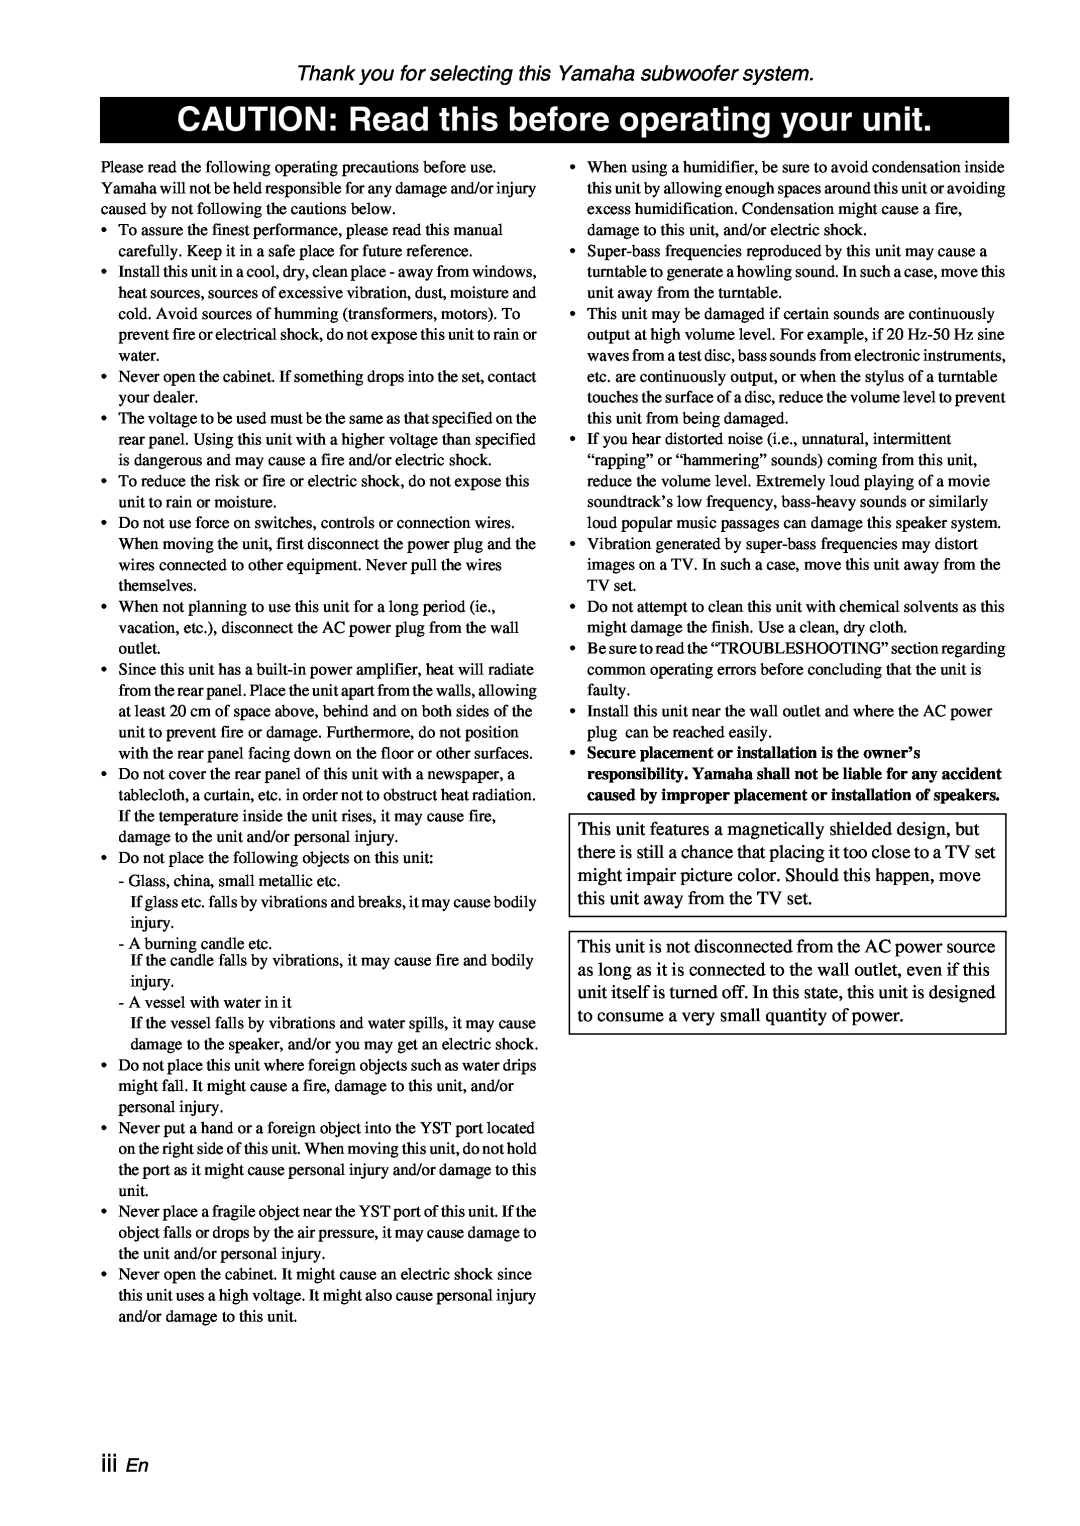 Yamaha YST-RSW300 owner manual CAUTION Read this before operating your unit, iiiEn 